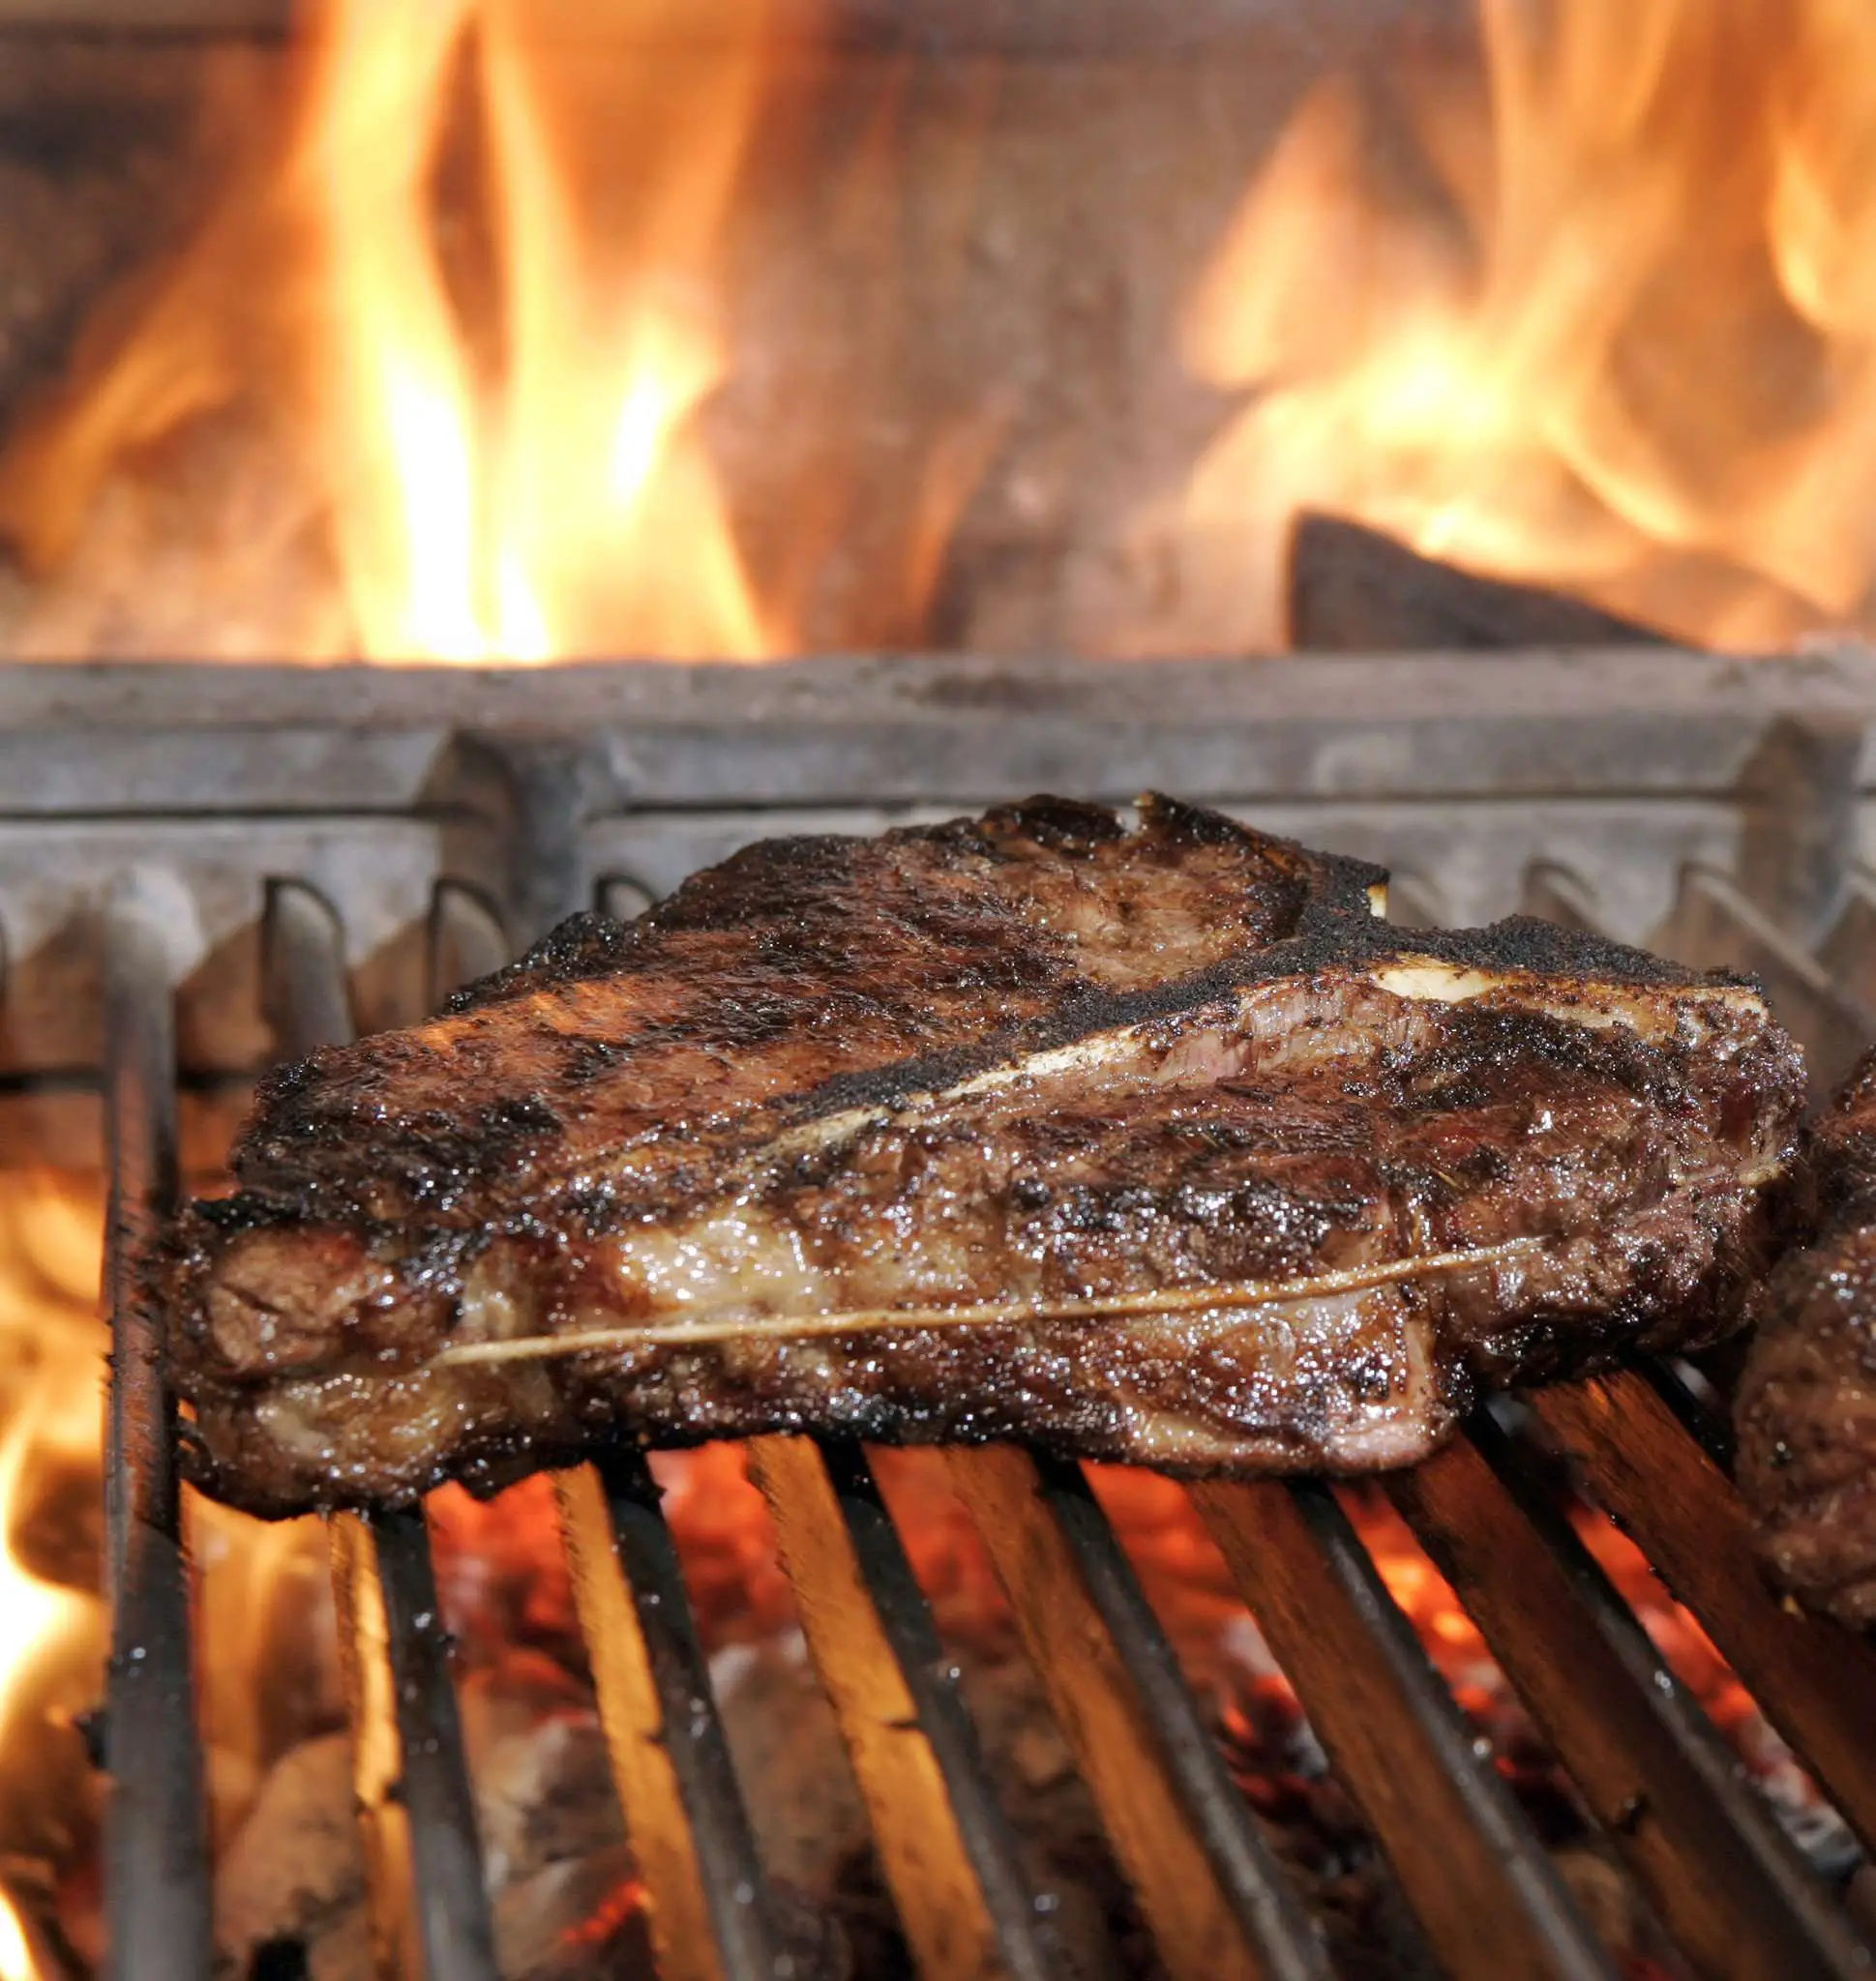 The chemistry behind grilling steak